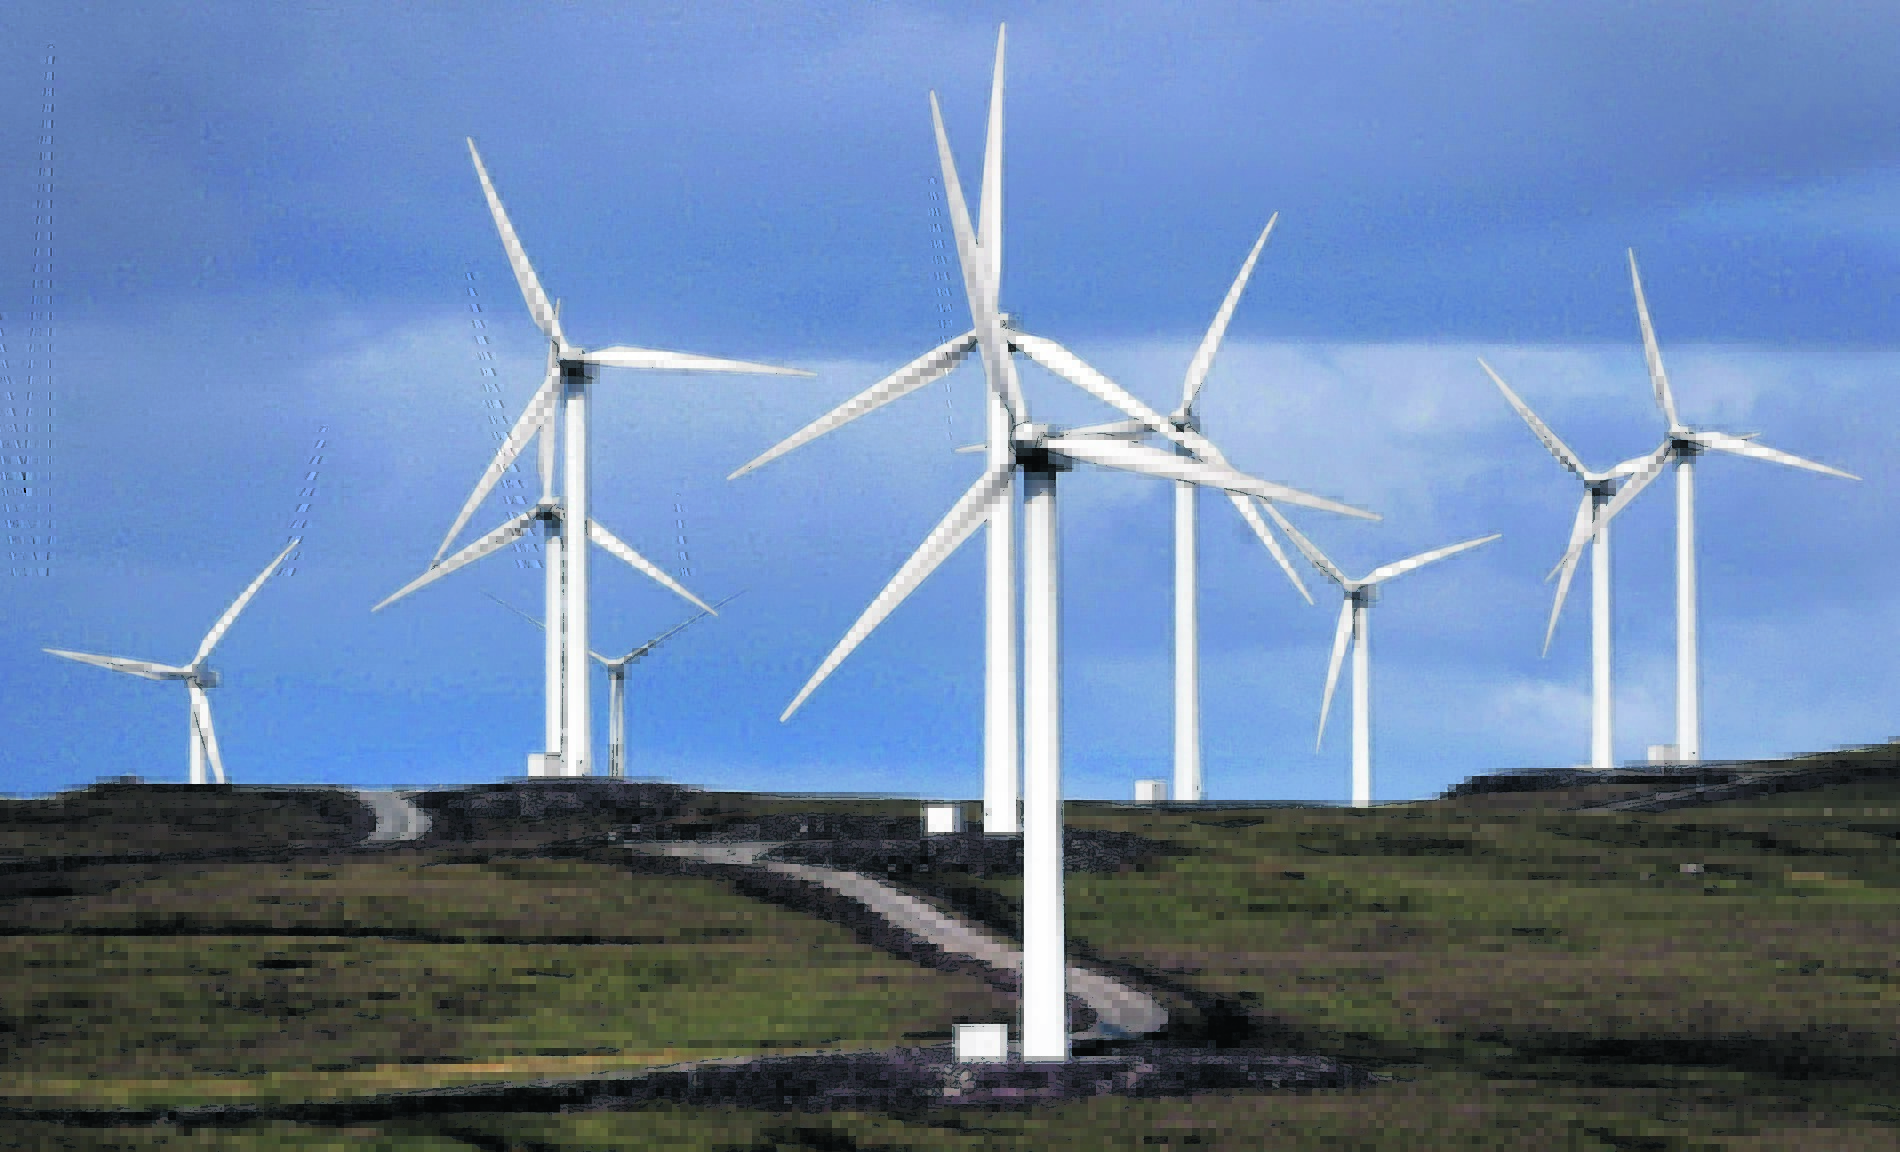 Anti-wind farm campaigners have attacked survey showing growing support for industry.